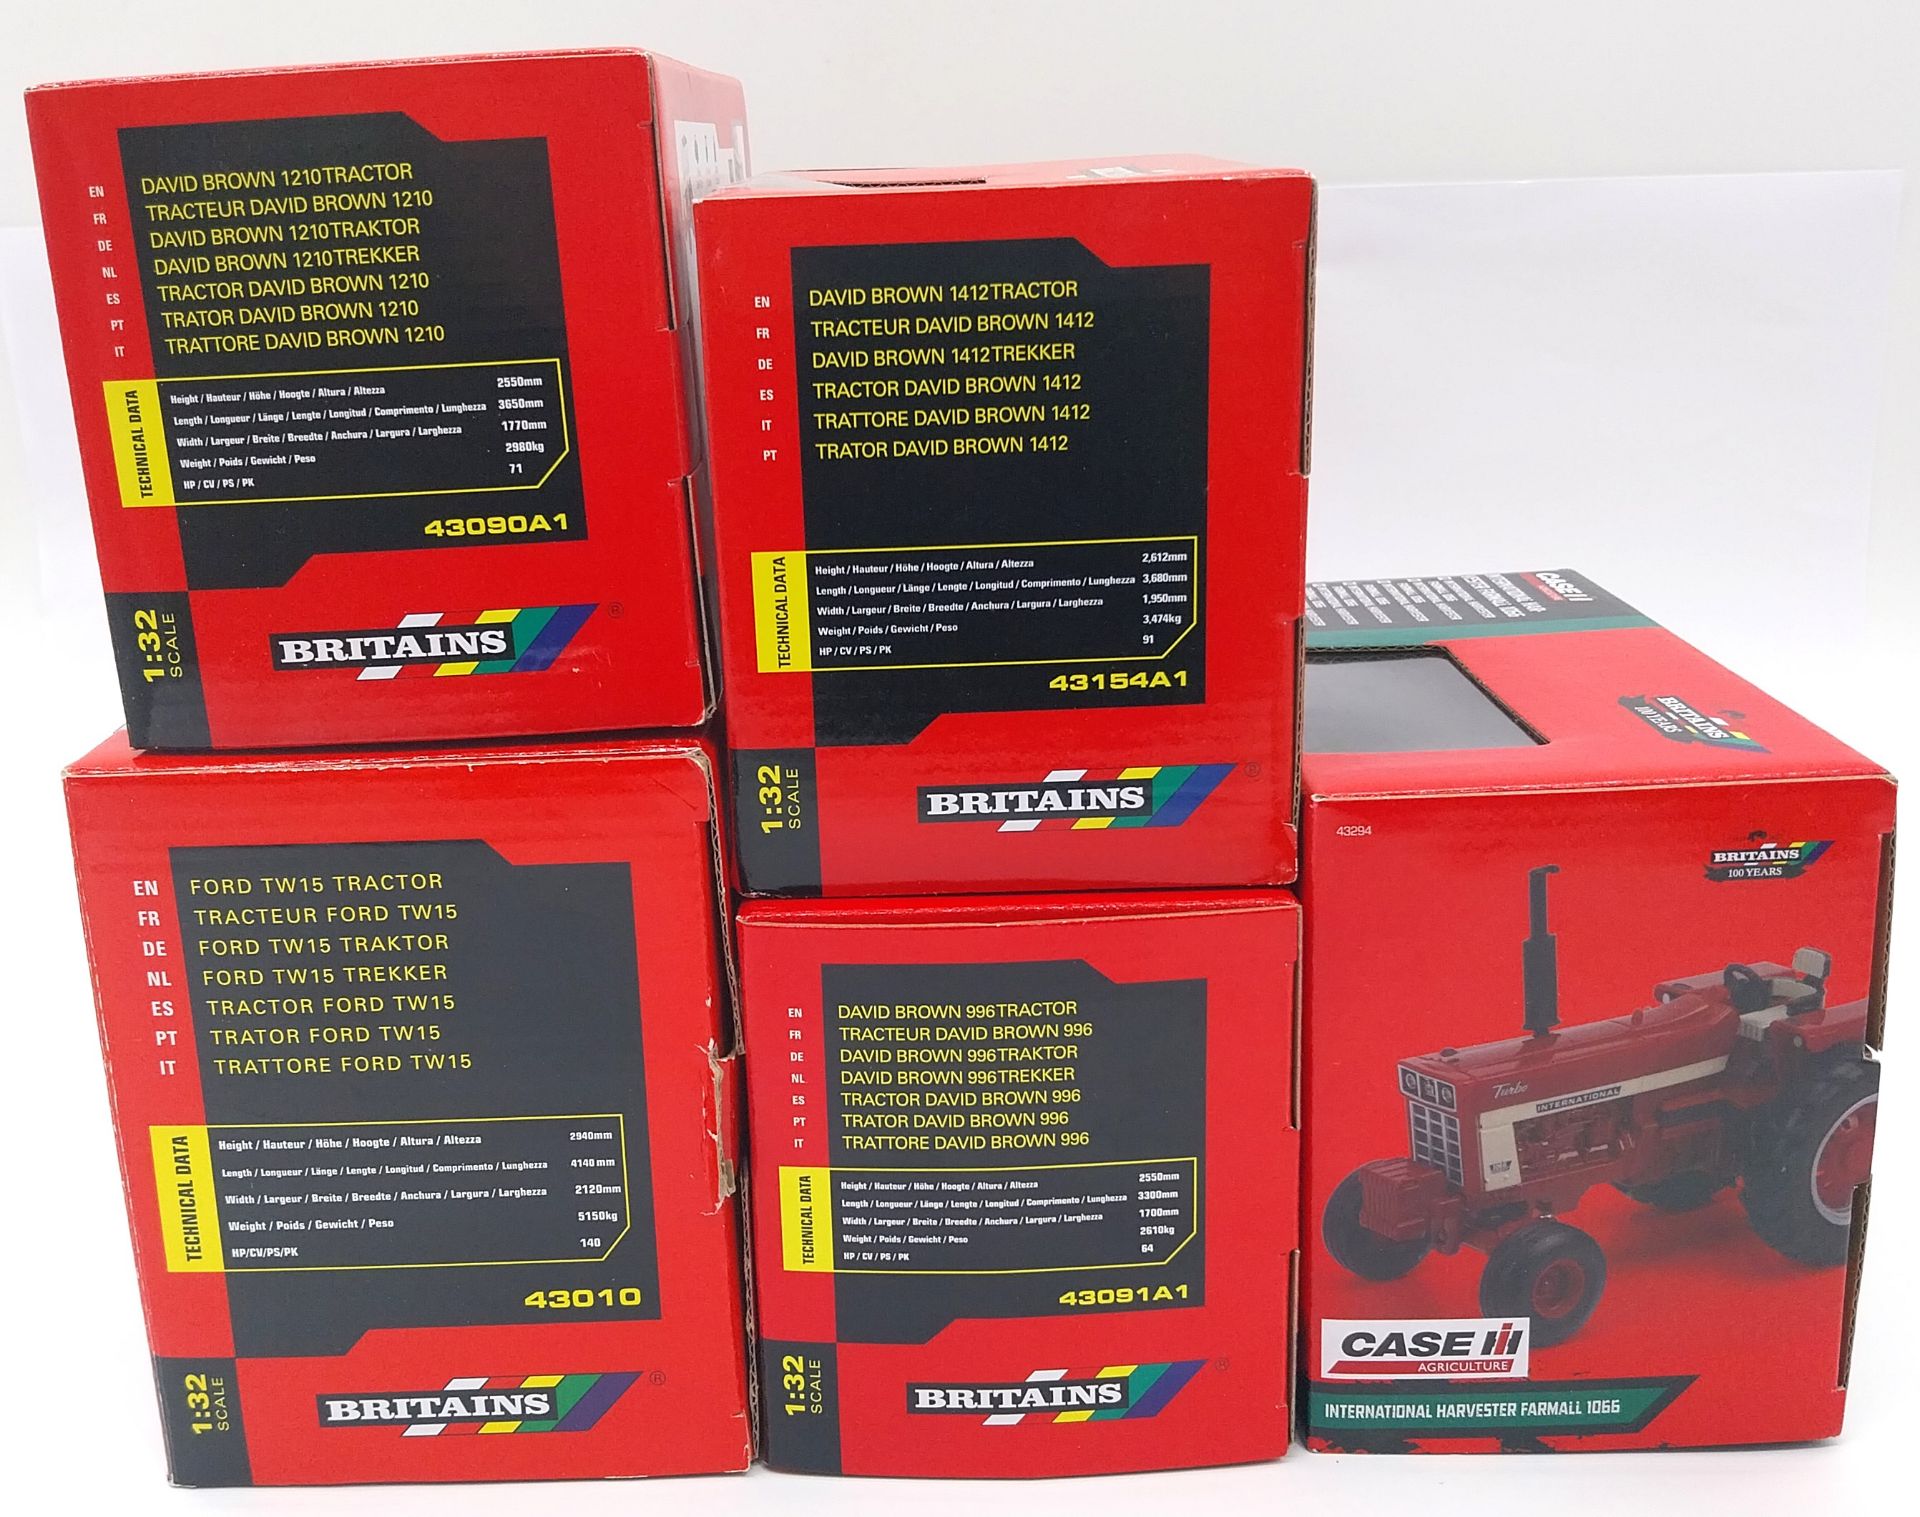 Britains, a boxed 1:32 scale Tractor - Image 2 of 2